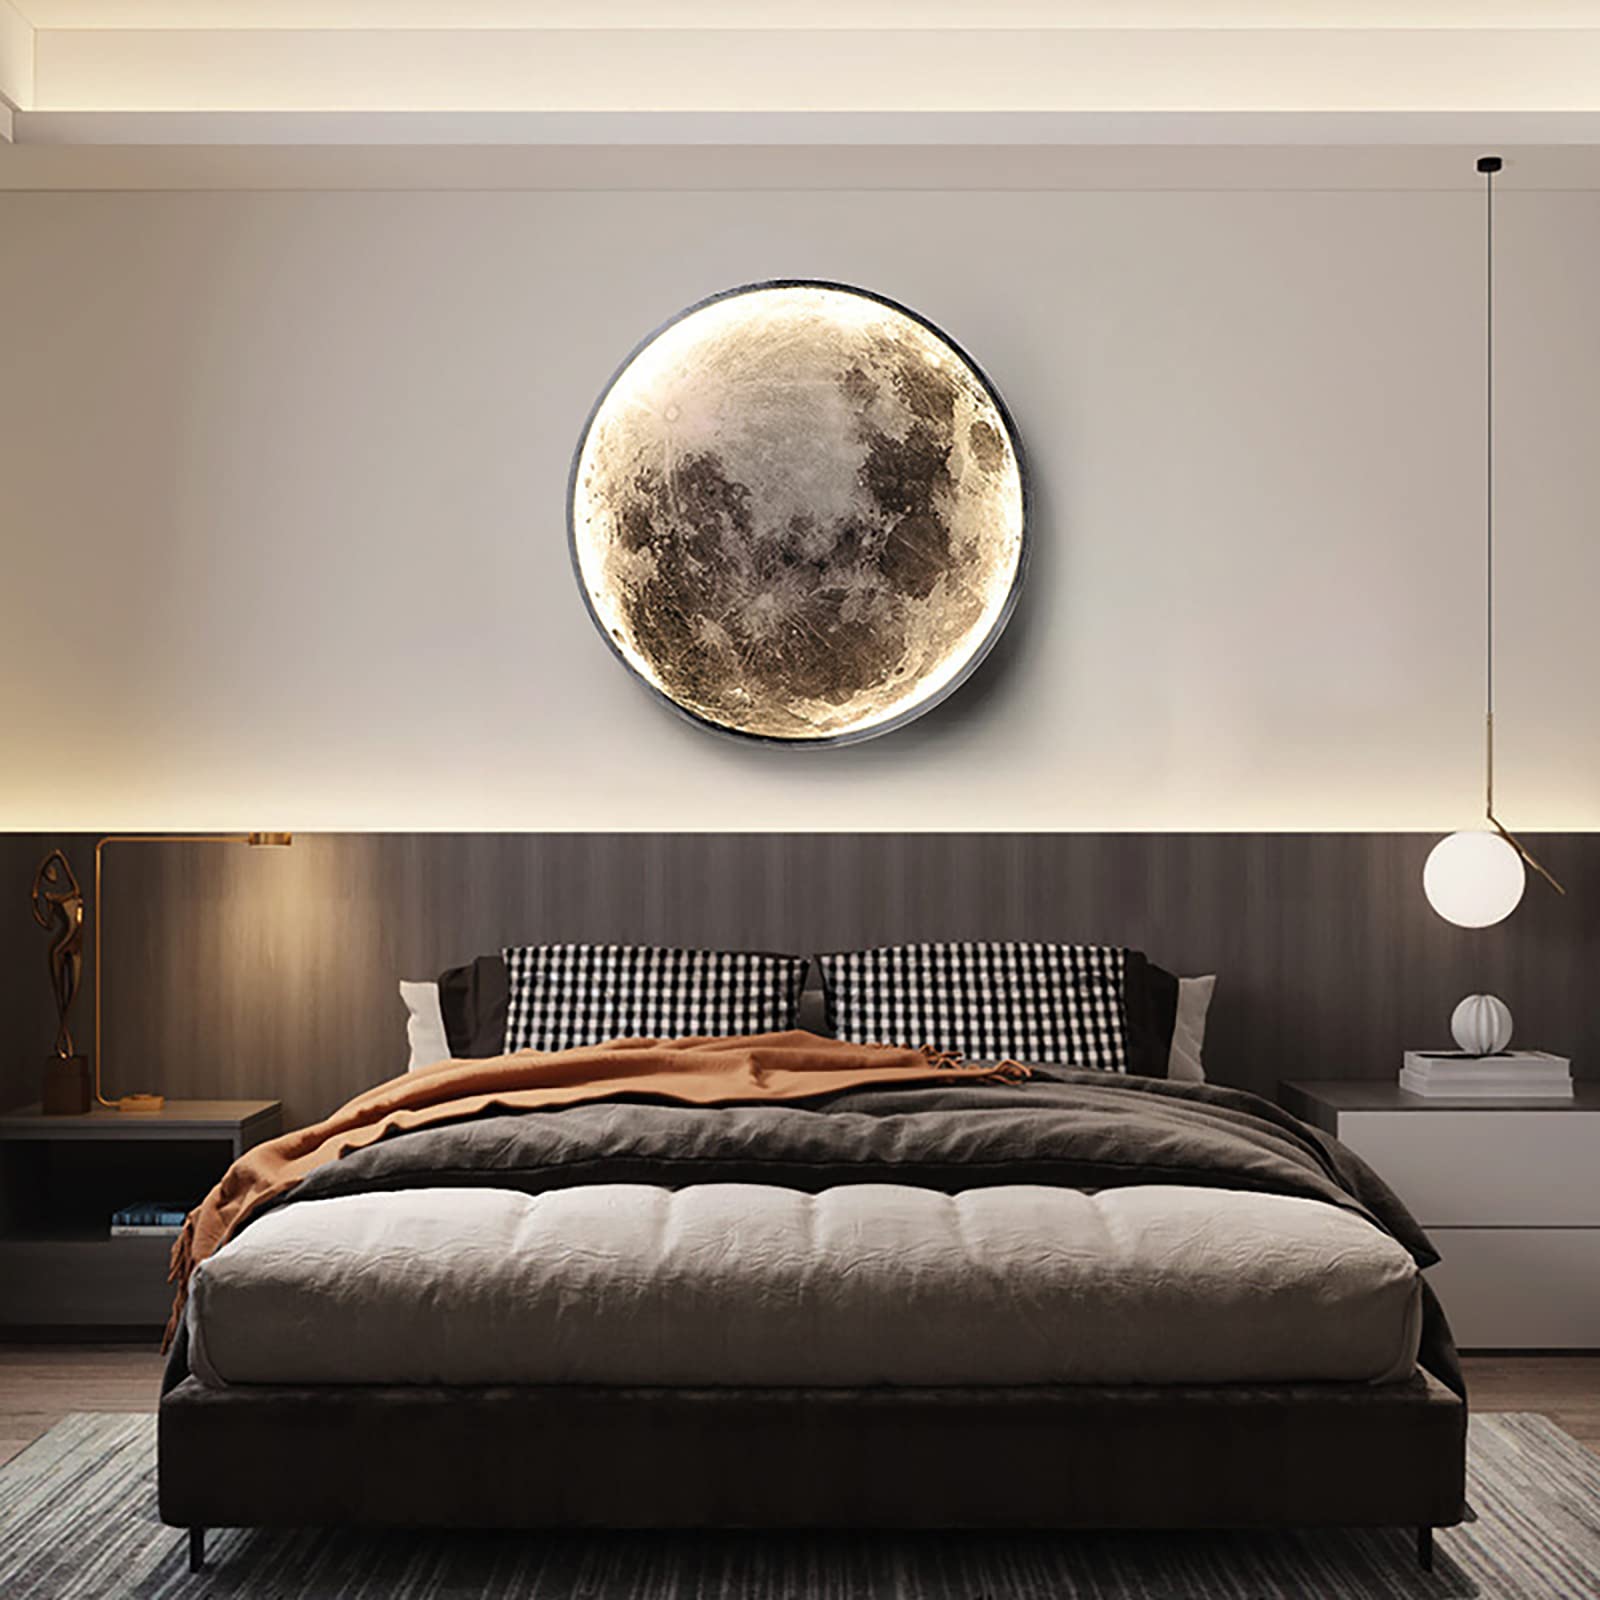 REYDELUZ 19.6 Inch LED Bedroom Wall Lamp Decorative Atmosphere Lamp with The Effect Of Three Color Mode Lamp In The Bedroom Corridor